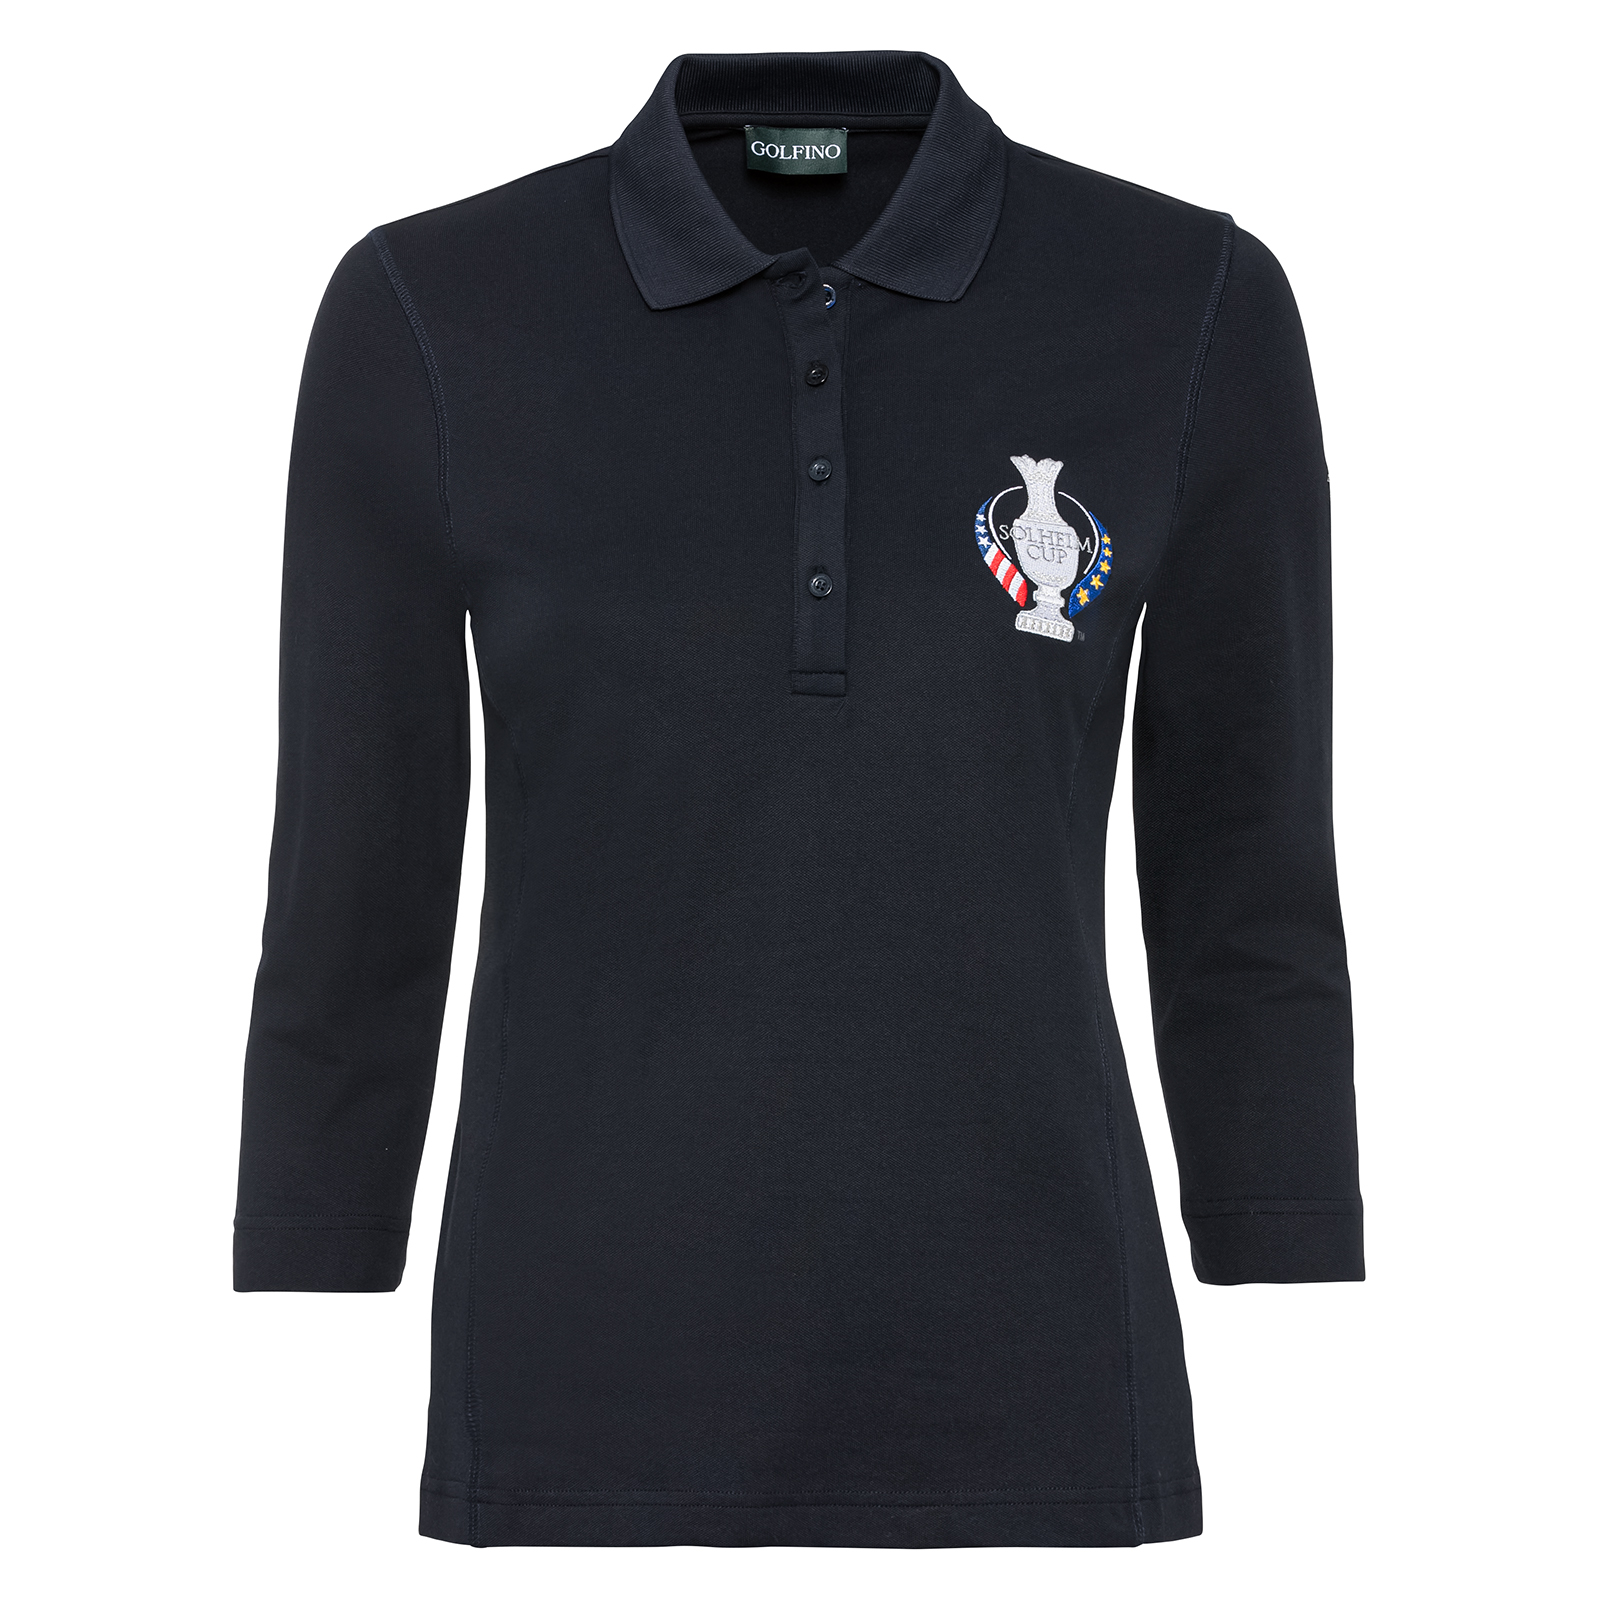 Ladies' polo shirt with UV function and Solheim Cup design